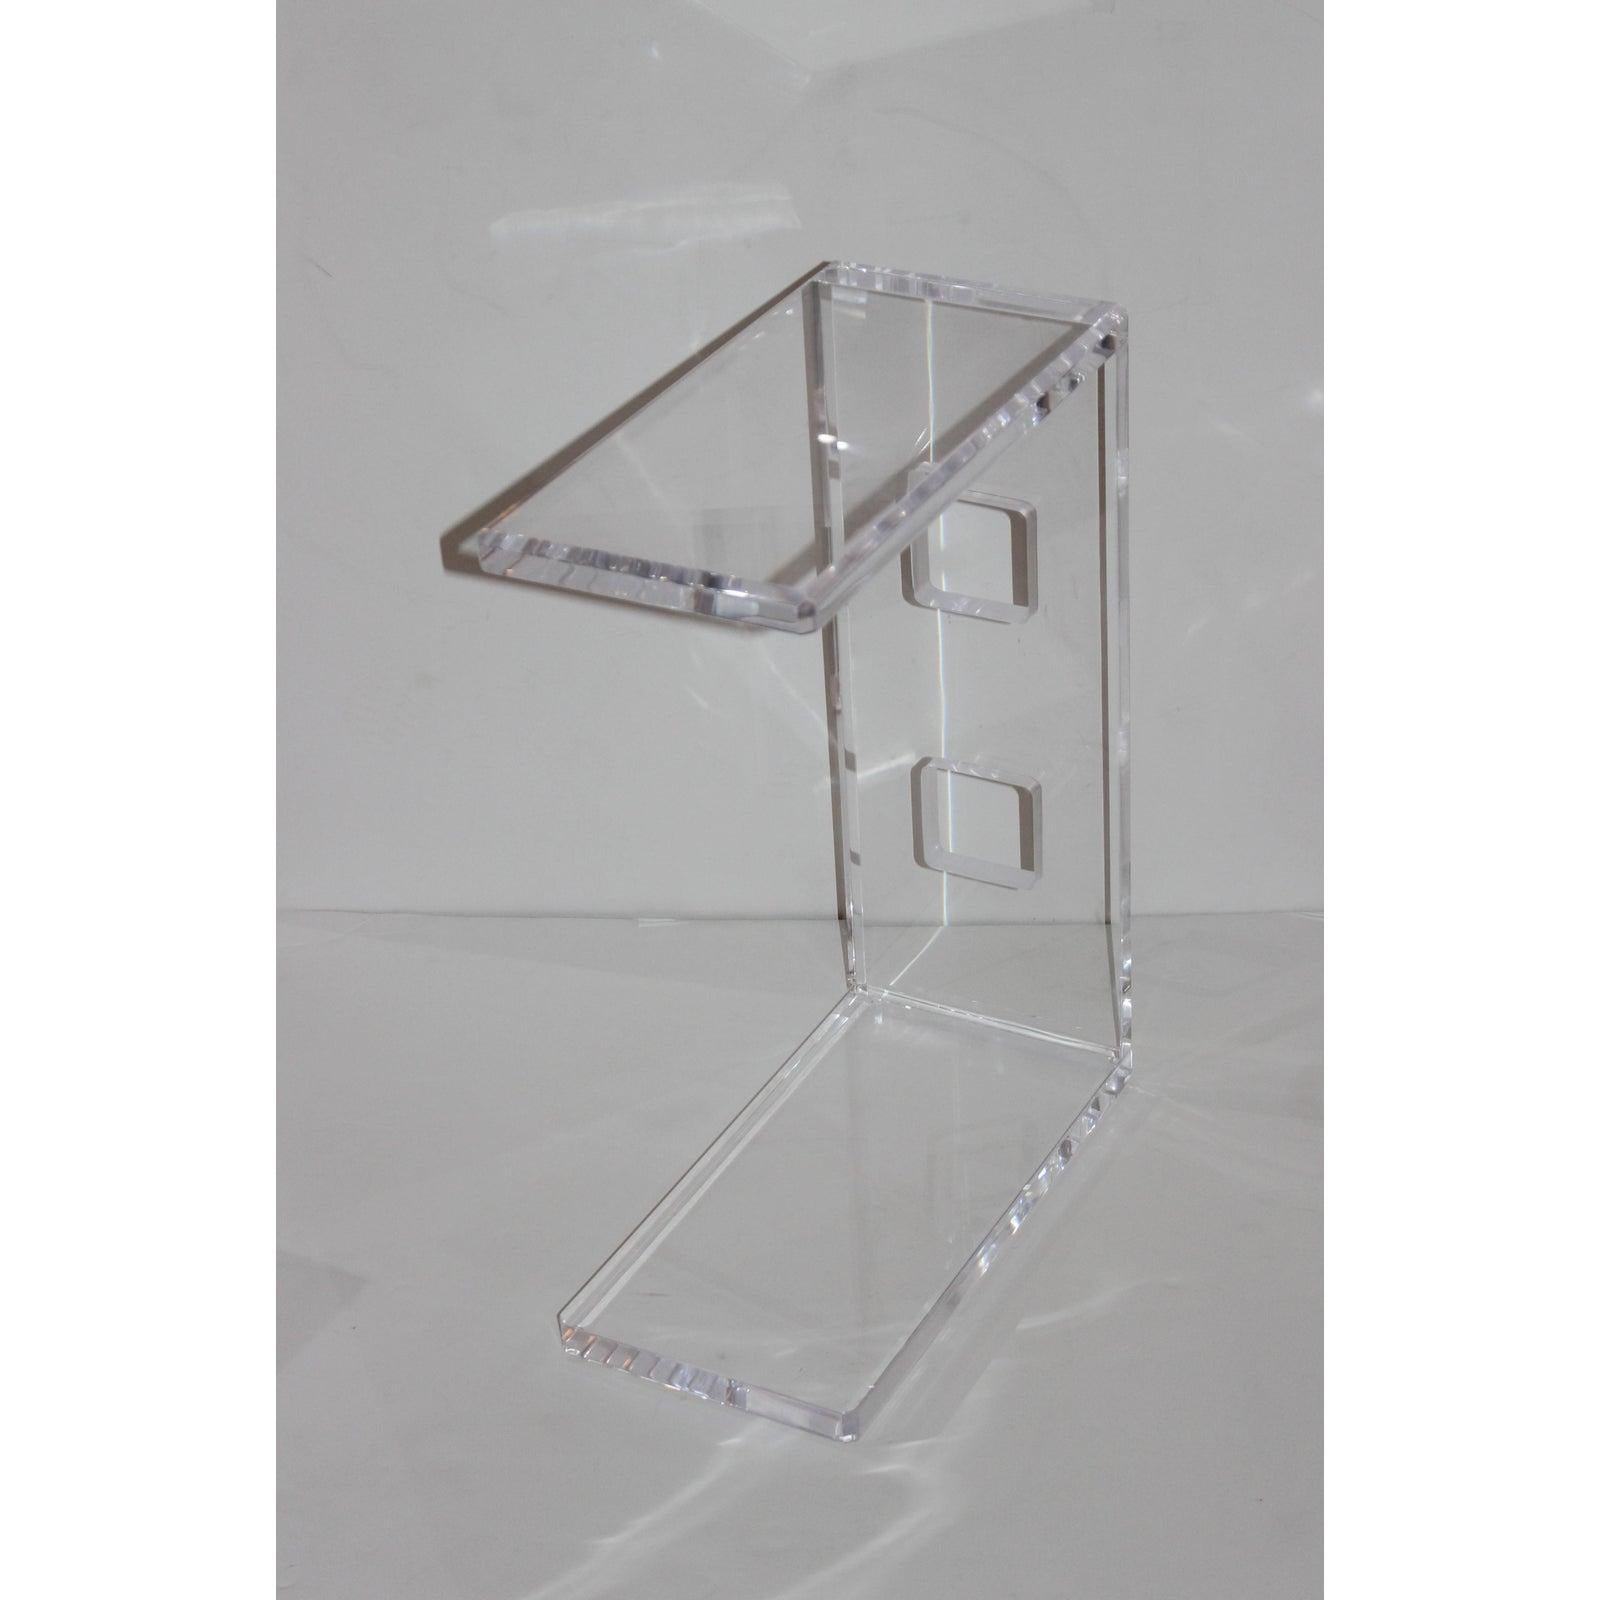 This stylish custom made lucite drinks table by Iconic Snob Galeries is the perfect size next to the sofa a club chair and with its open-end design the piece can be pulled up to the sofa as needed (see last image).

These are fashioned from 1 inch